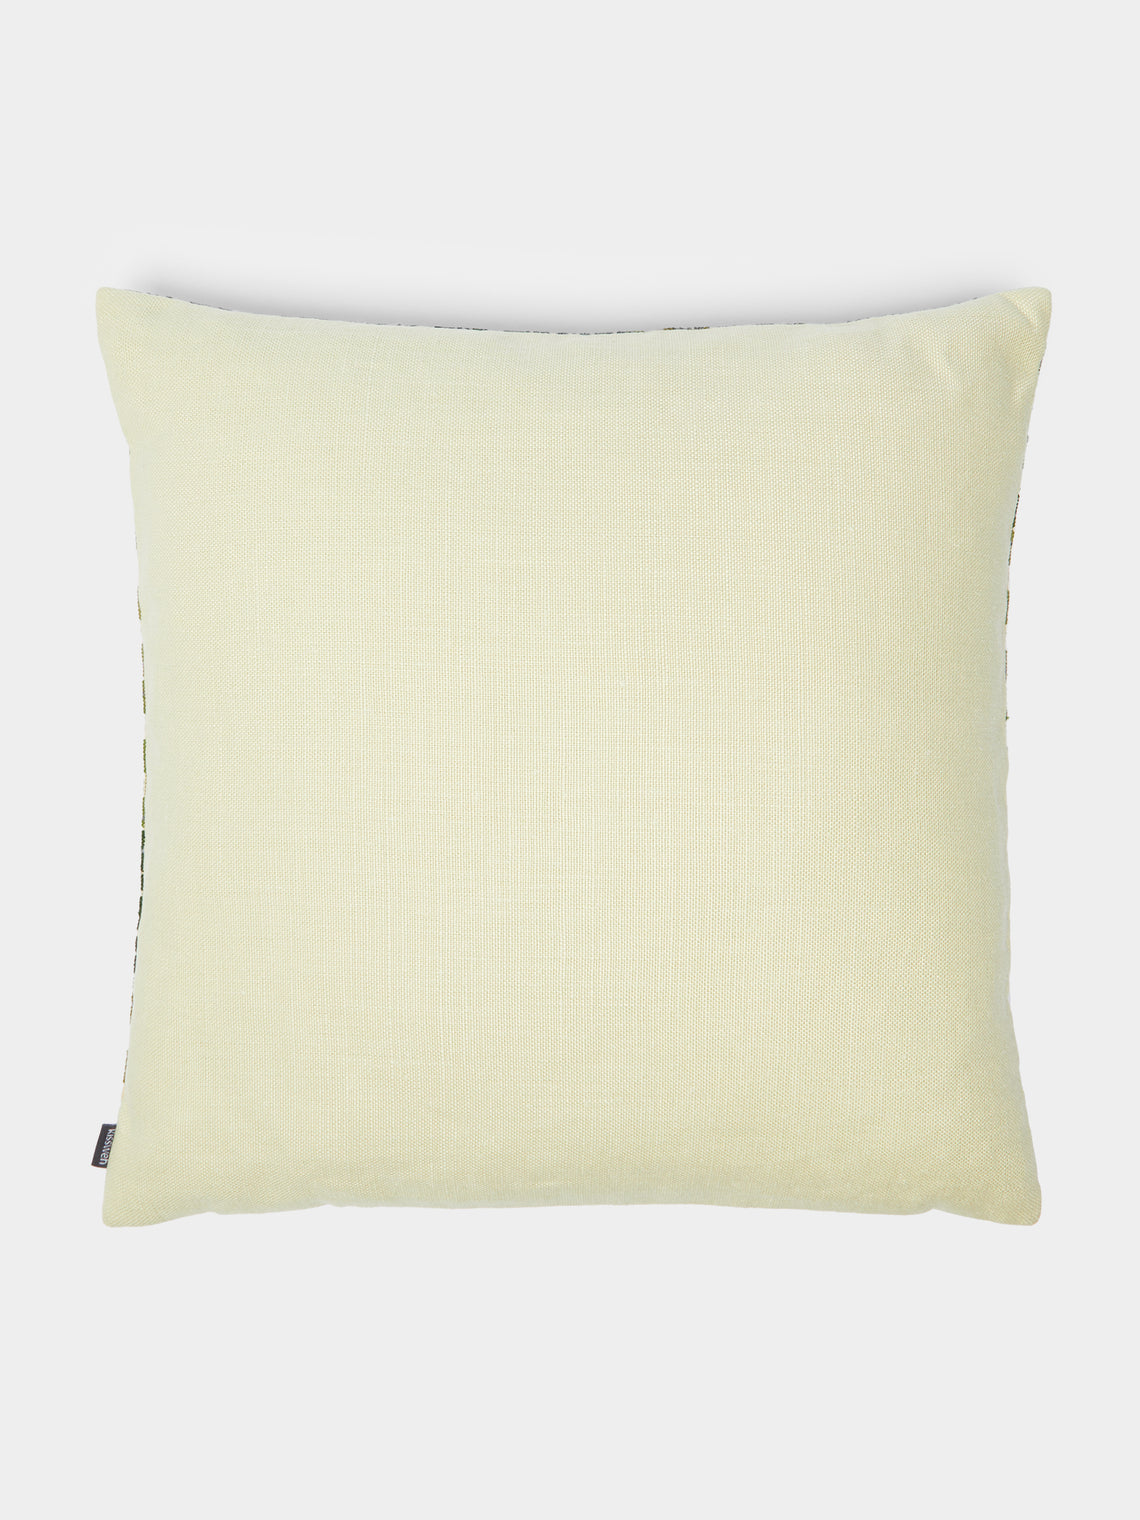 Kissweh - Moon of Ramallah Hand-Embroidered Cotton Cushion -  - ABASK